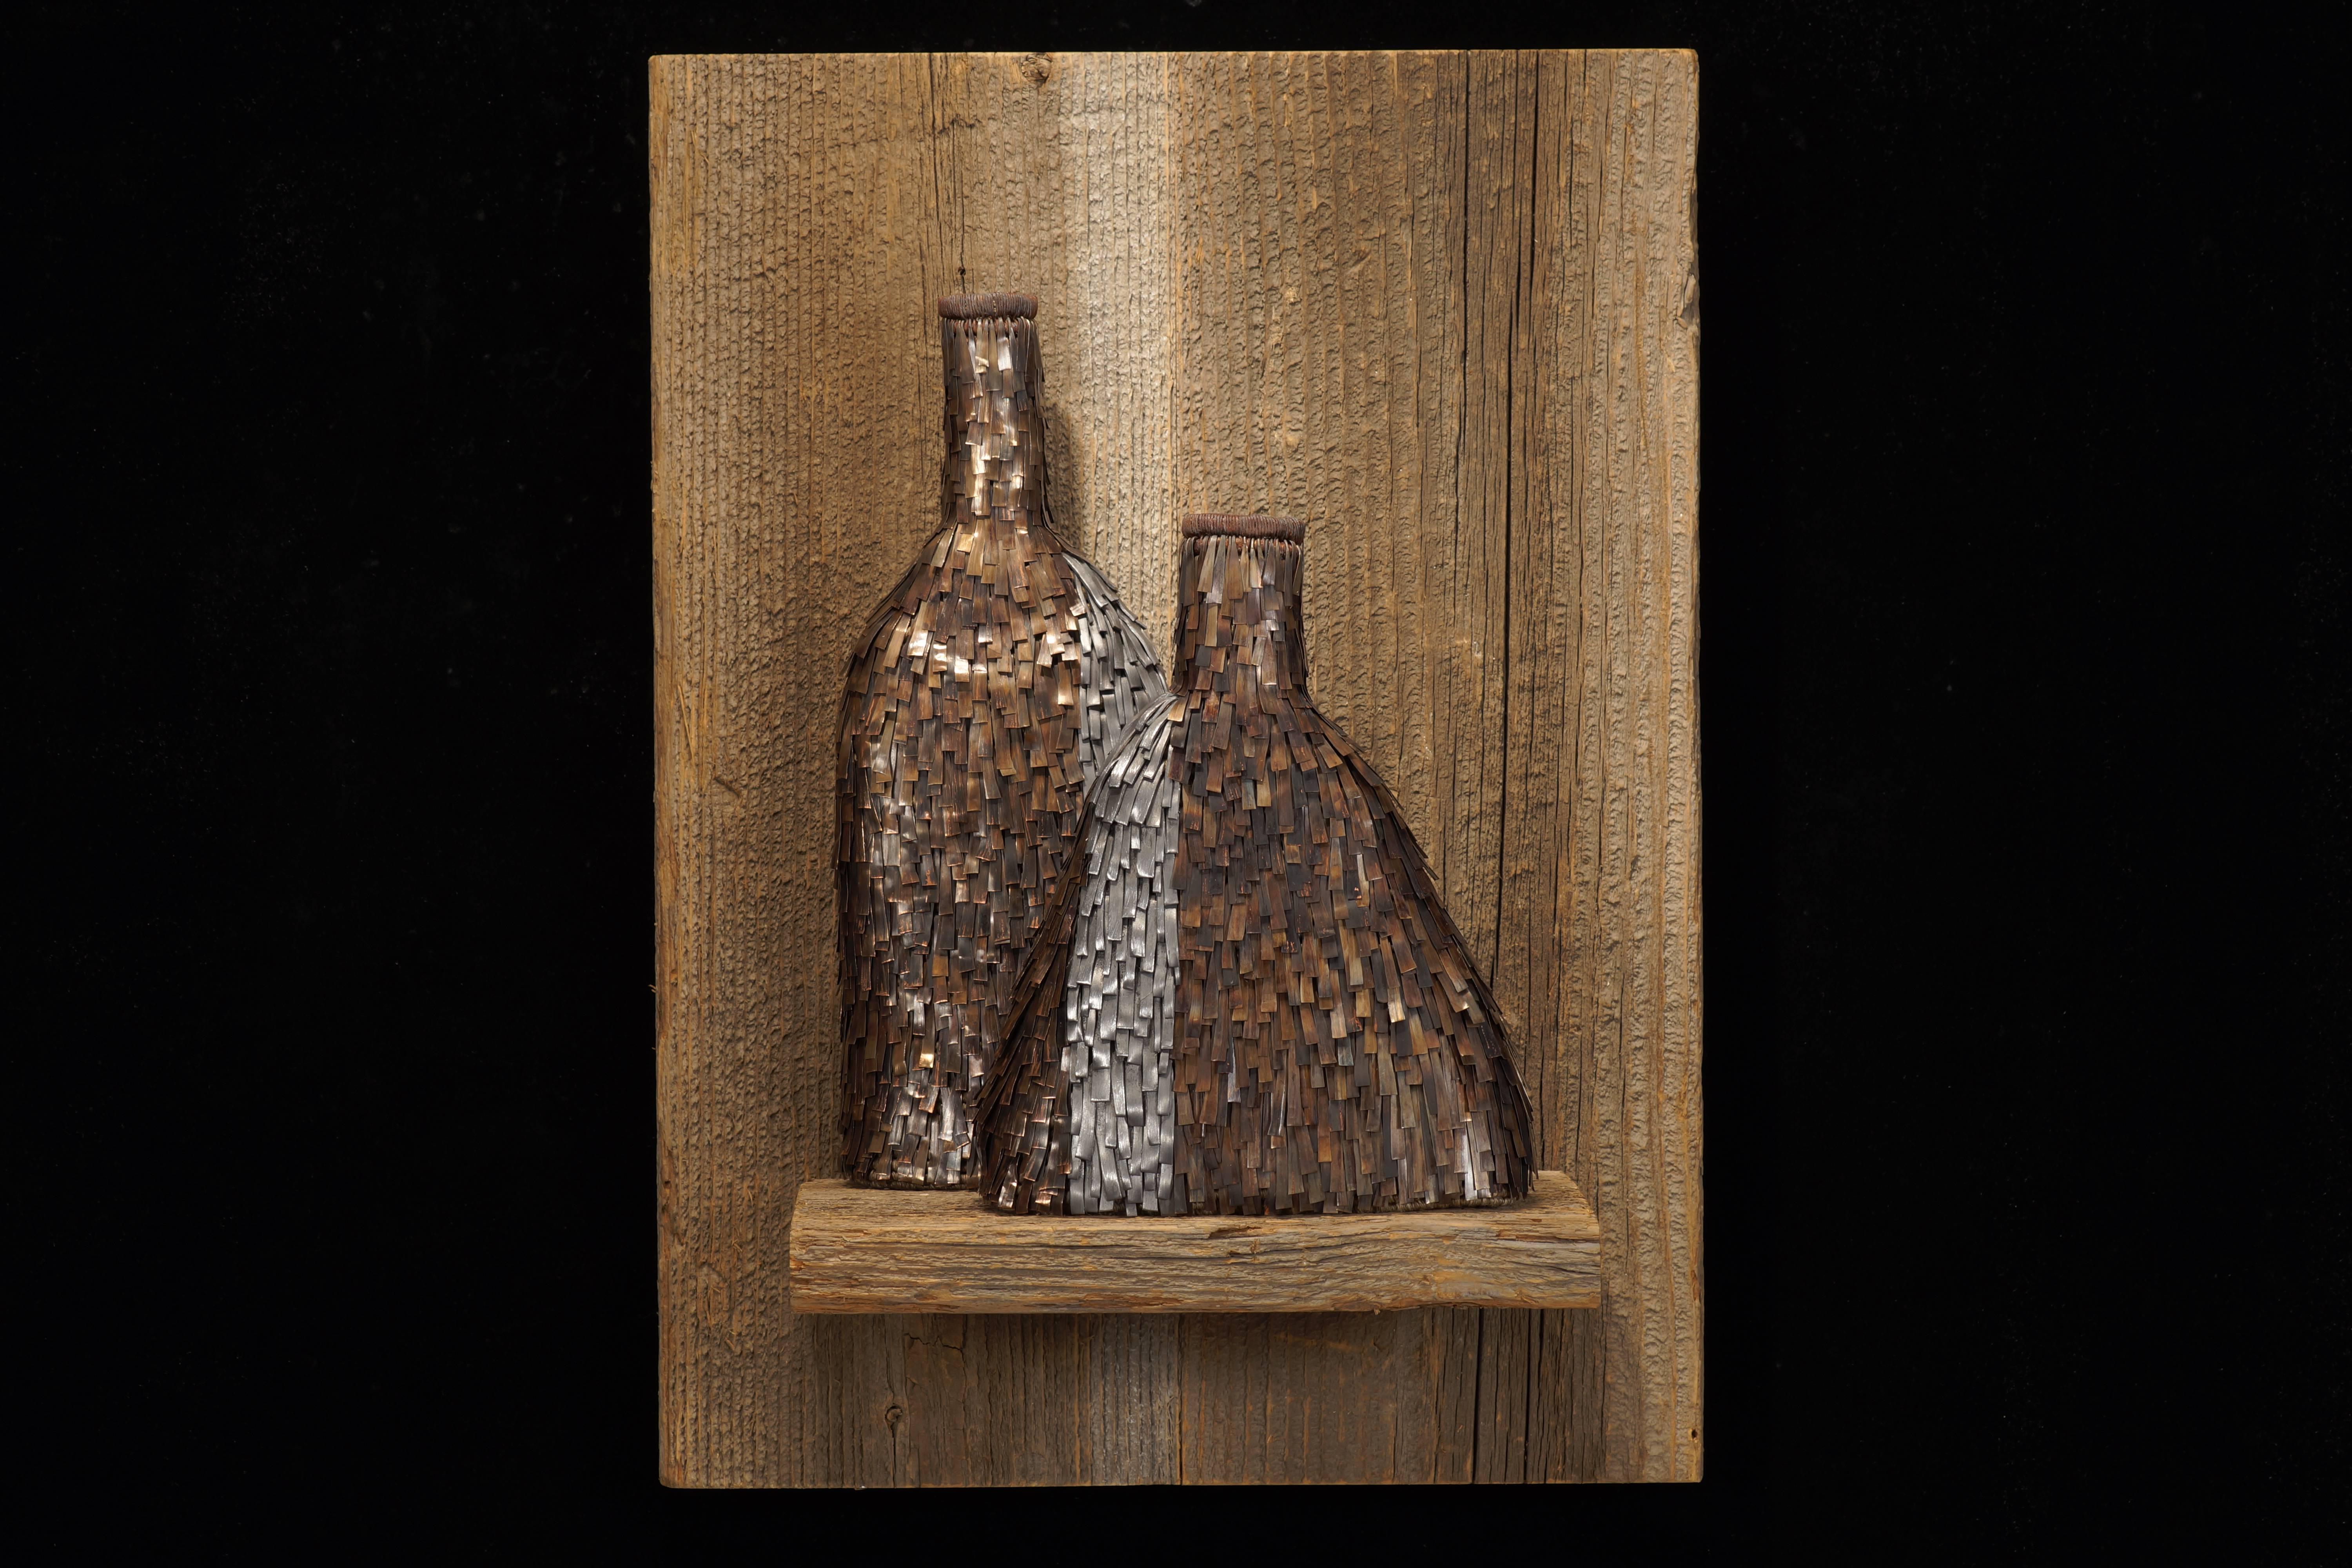 Mary Giles Still-Life Sculpture - "Grey Streak Transparency", Waxed Linen Sculpture with Mixed Media, Copper, Iron